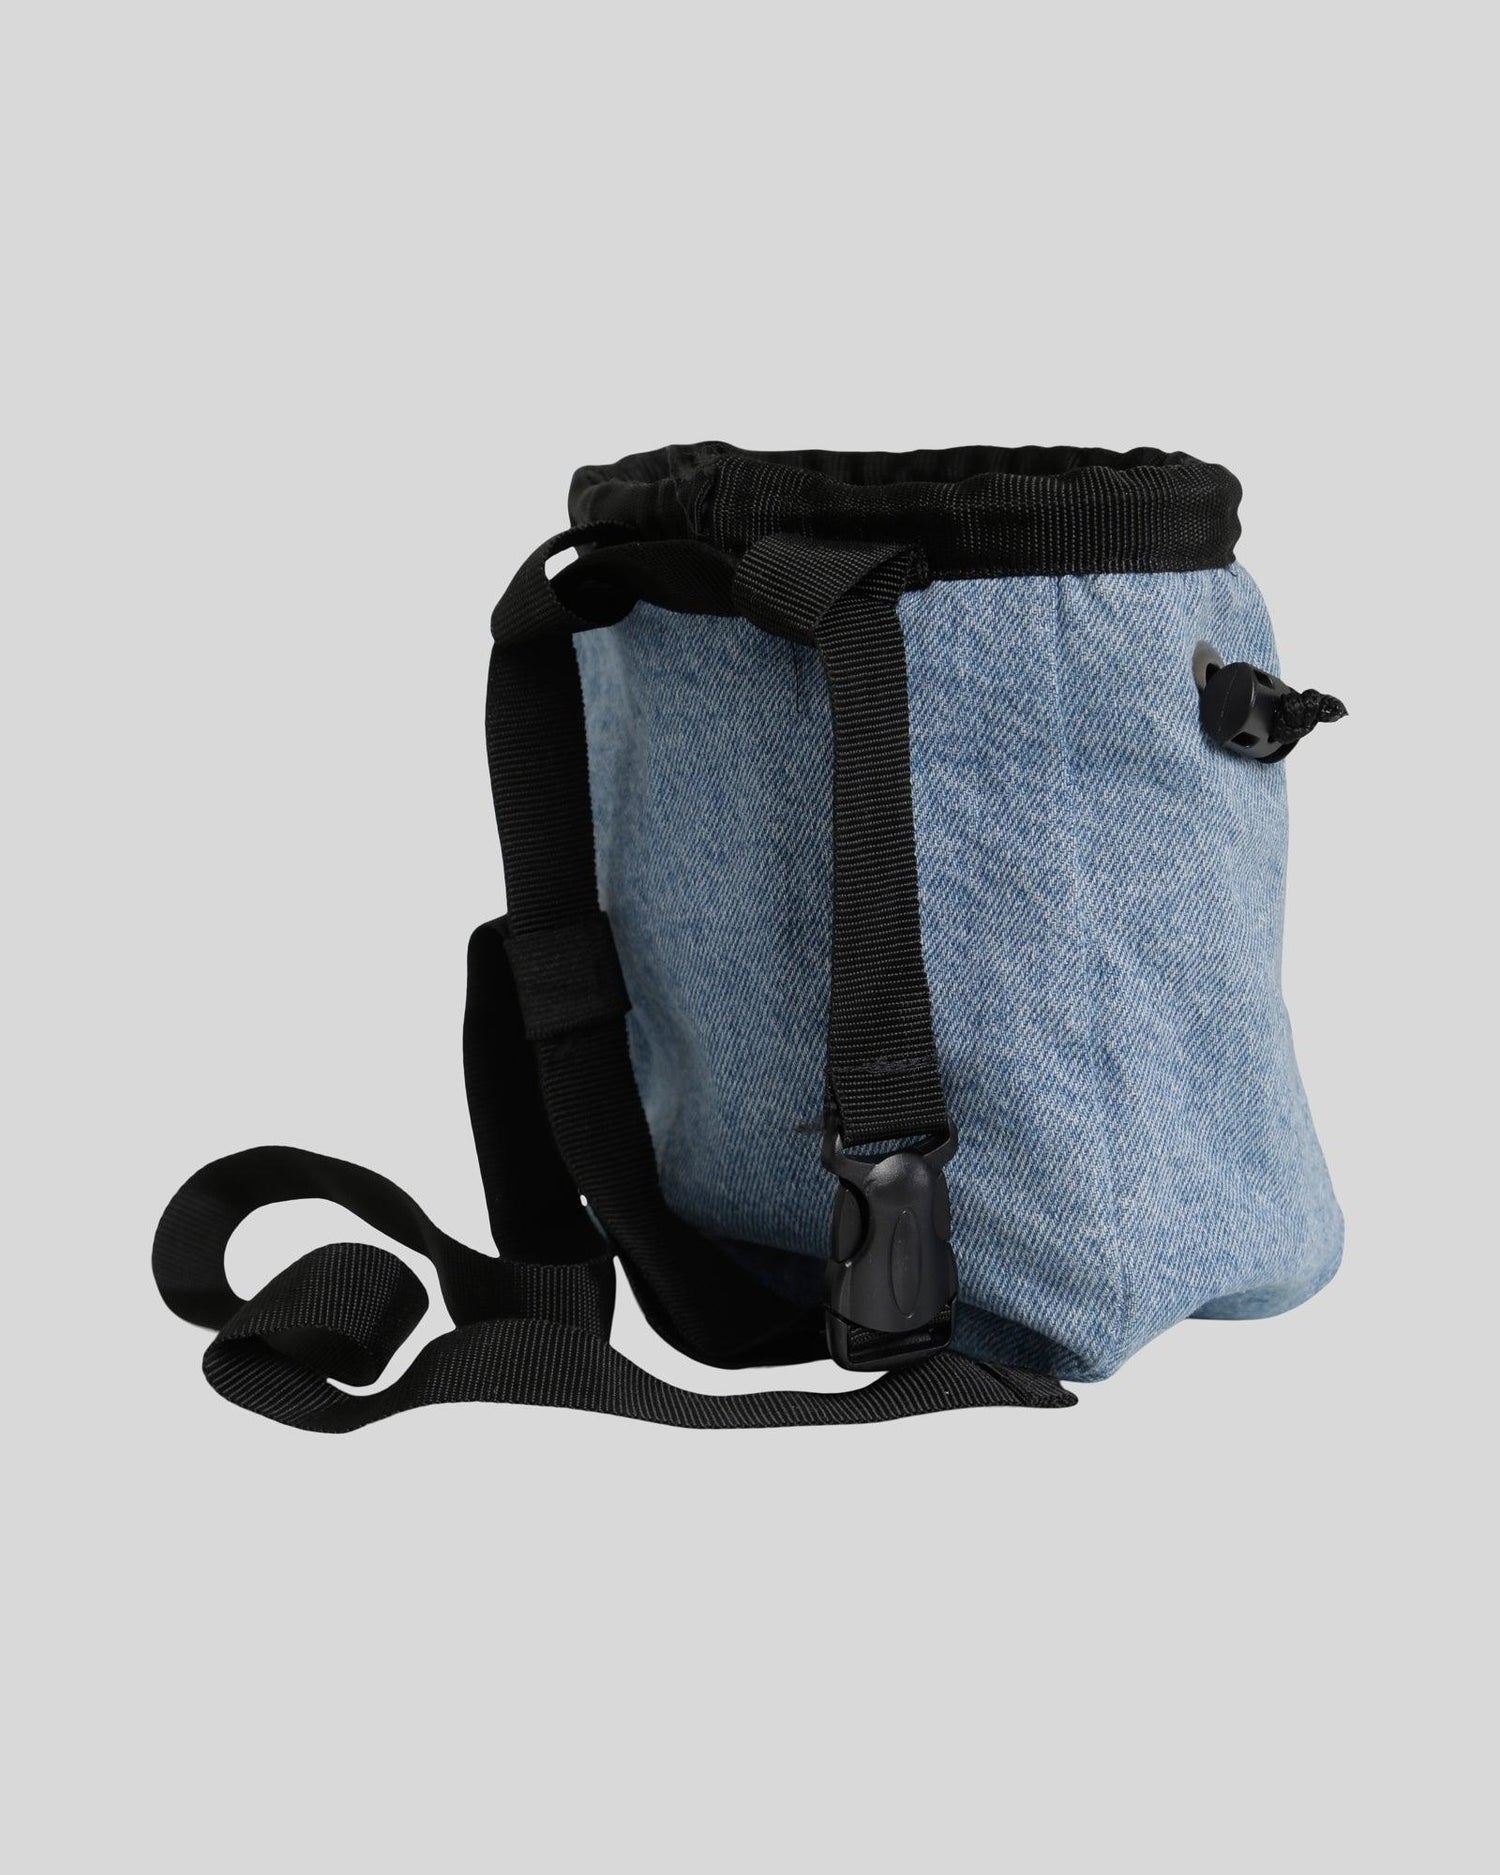 Welcome to Rustyflakes Sports : NEW EVOLV Cotton Knit Chalk Bags waist belt  included!